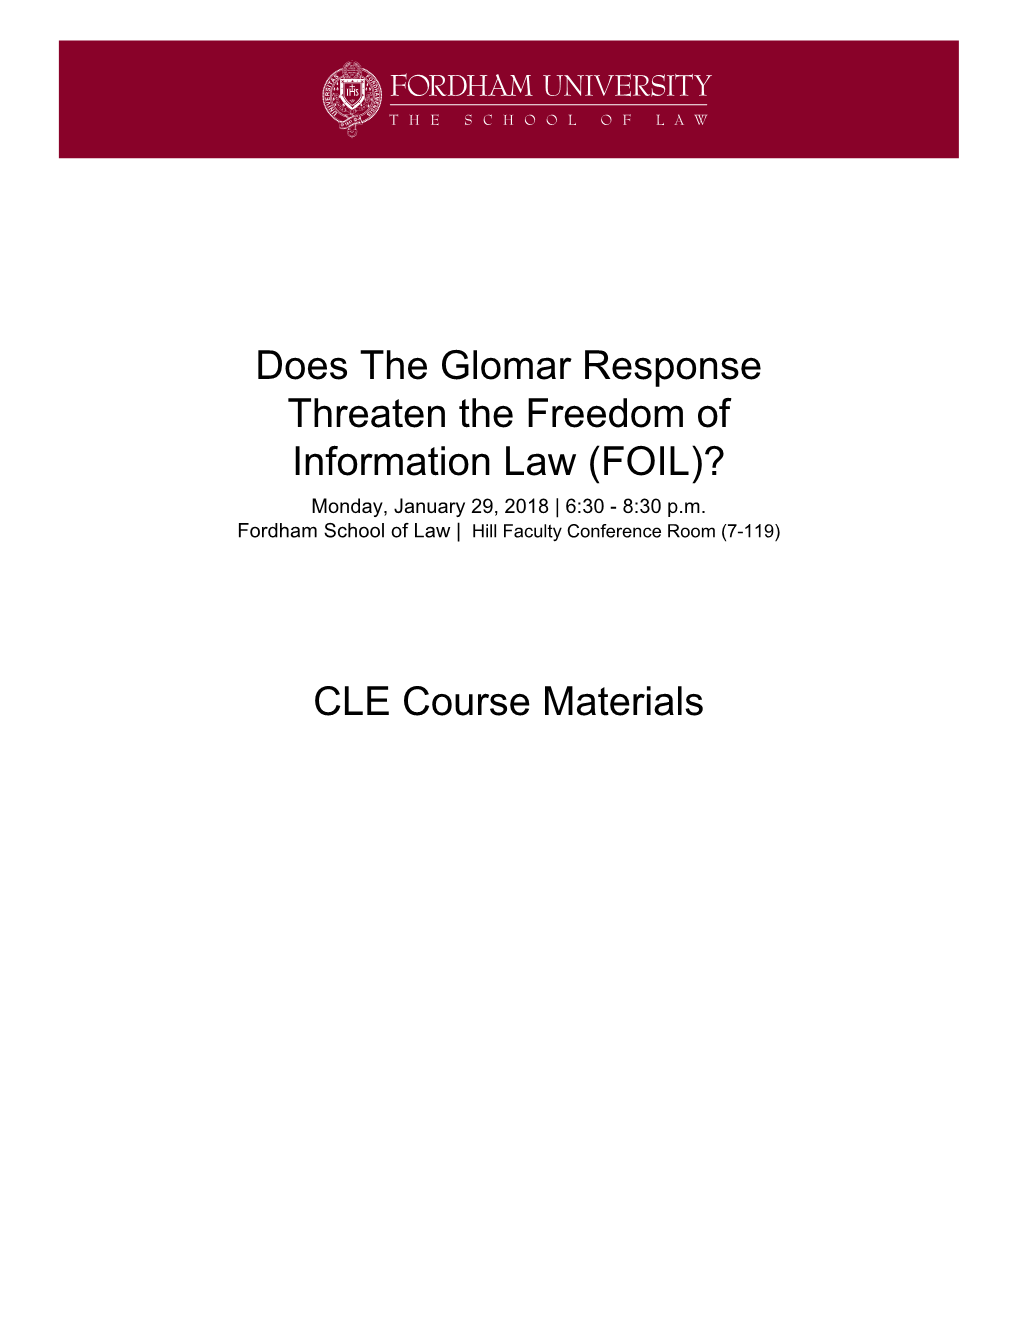 Does the Glomar Response Threaten the Freedom of Information Law (FOIL)? Monday, January 29, 2018 | 6:30 - 8:30 P.M